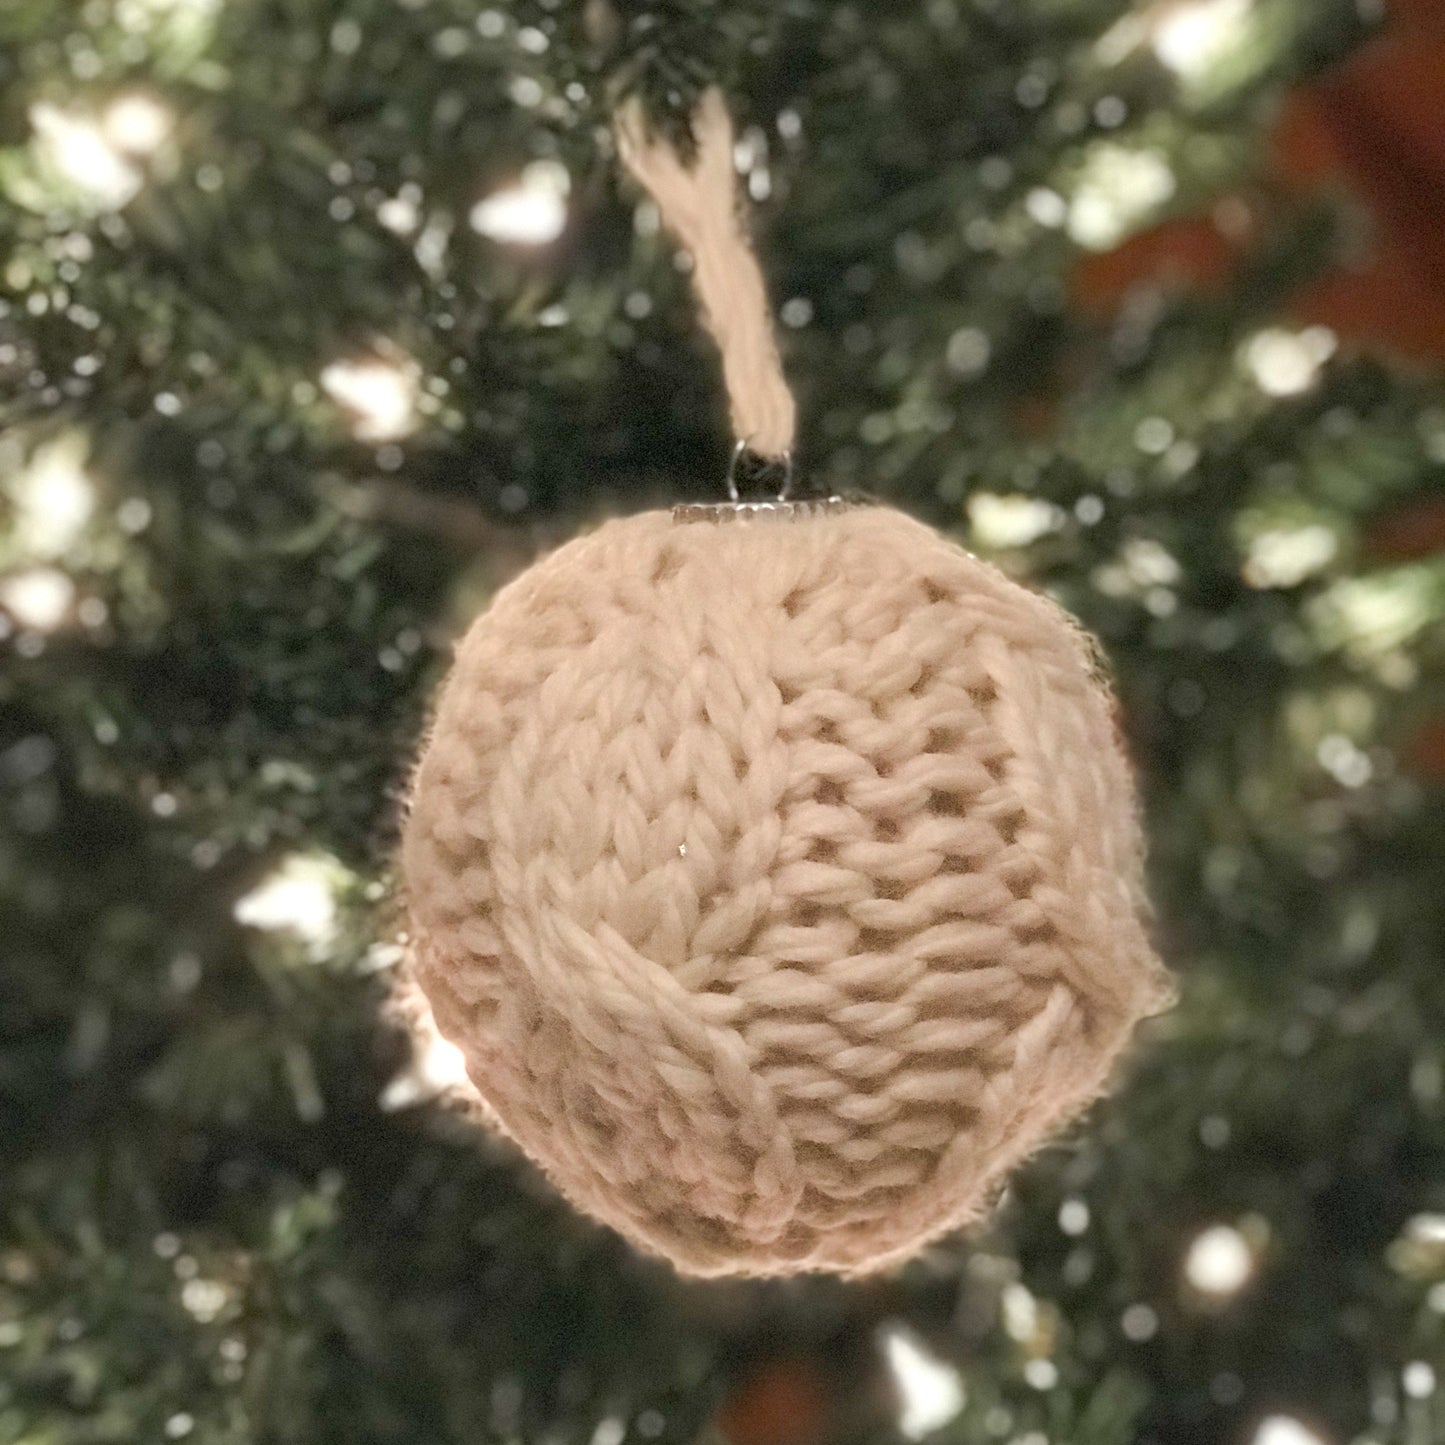 Home for Christmas: Cable Ornament Pattern